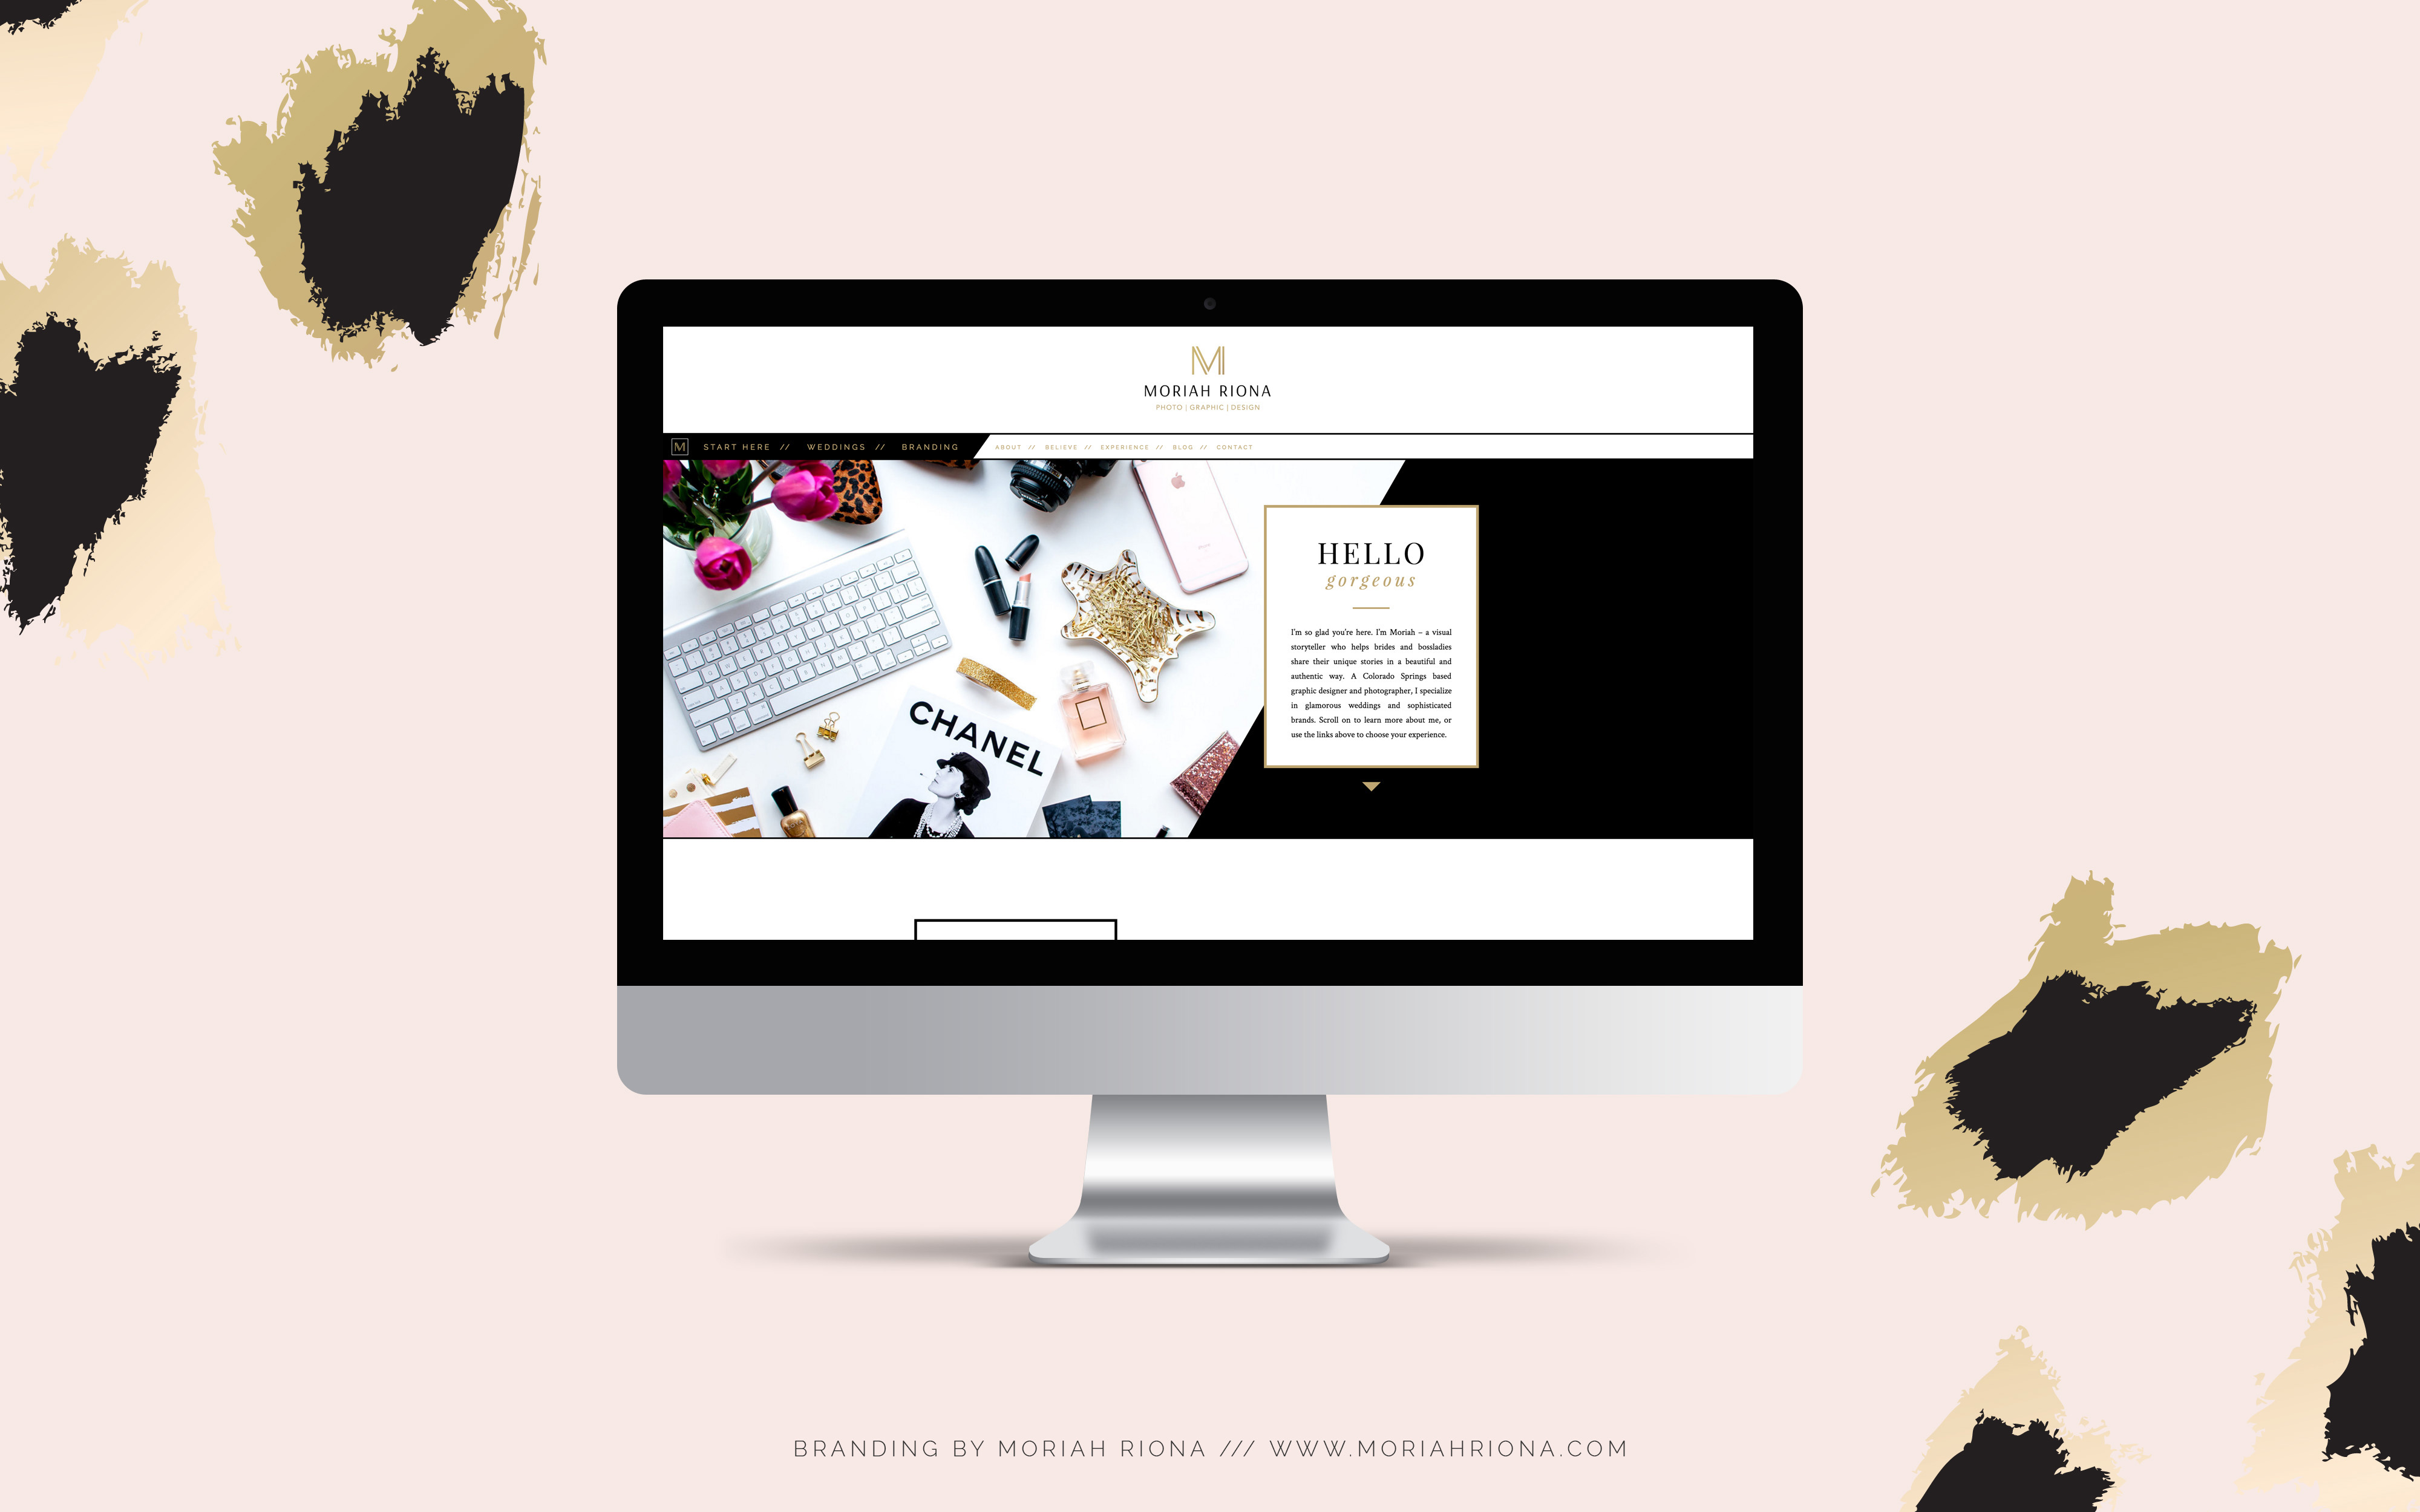 Luxe glam branding and website design for wedding photographer by Moriah Riona. Custom designed Showit 5 website. Graphic Design and Branding for photographers and creative bossladies.